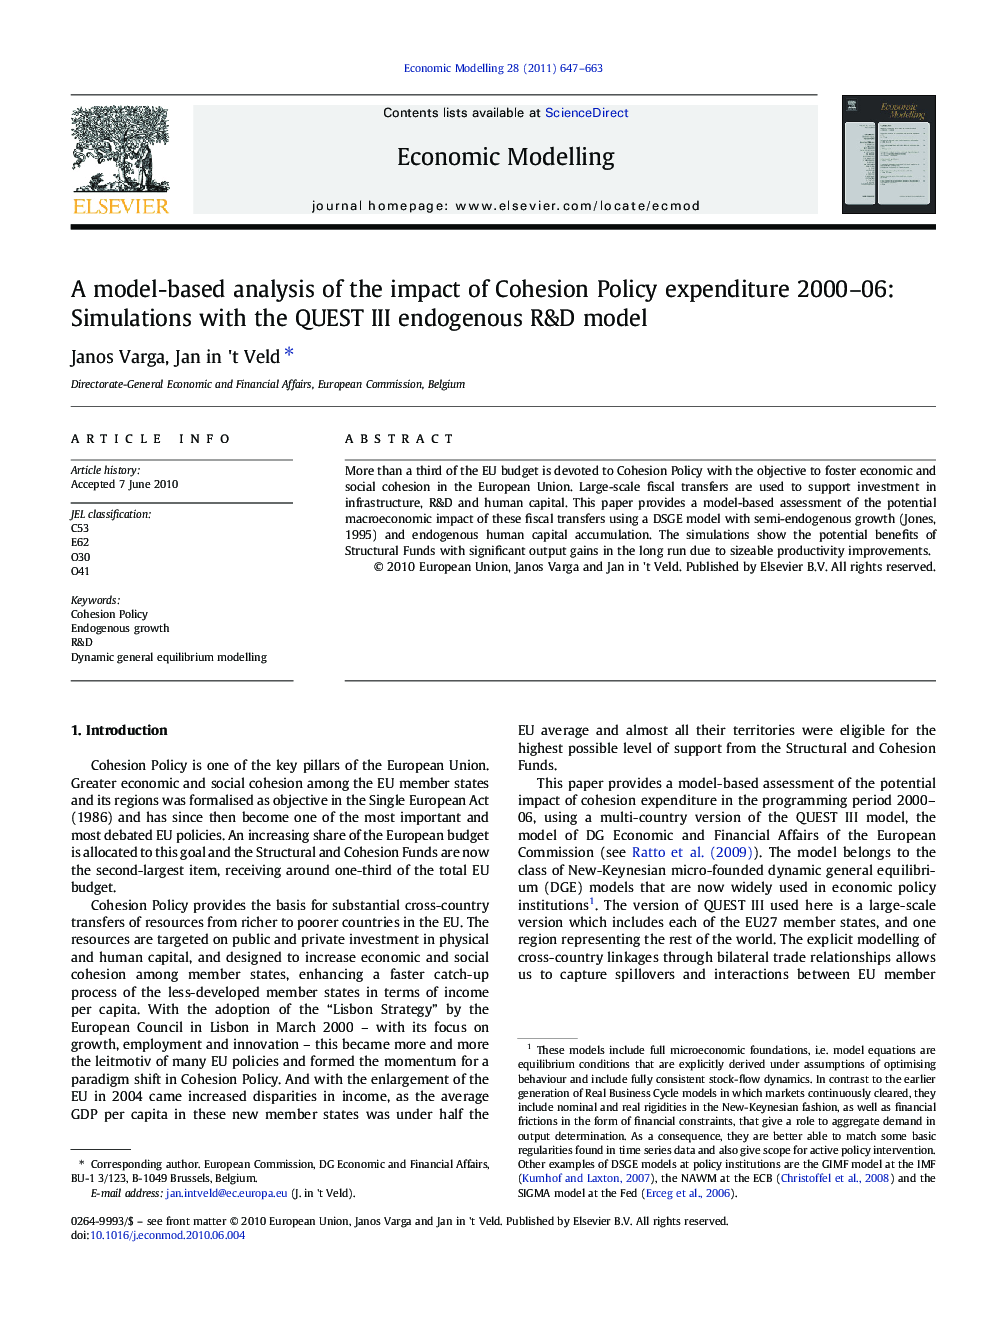 A model-based analysis of the impact of Cohesion Policy expenditure 2000-06: Simulations with the QUEST III endogenous R&D model